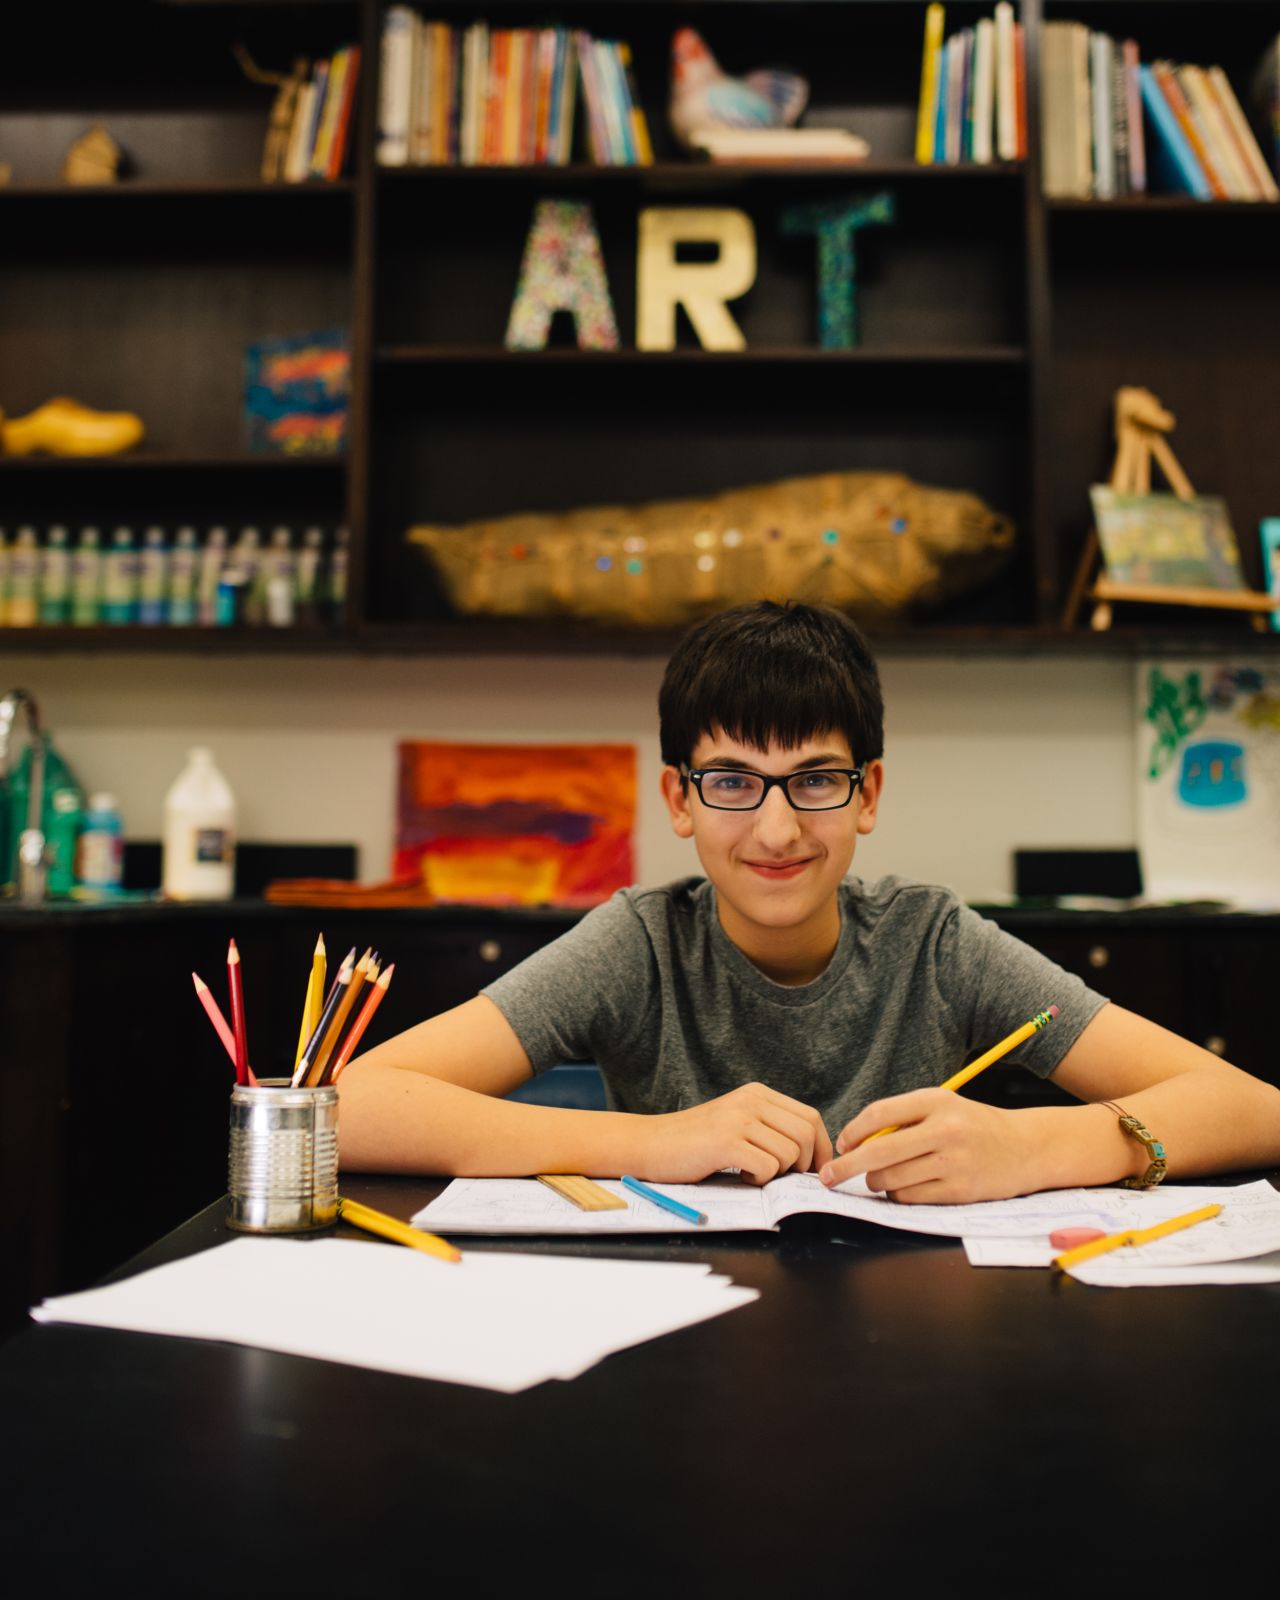 "When I'm drawing, my characters come alive, and it's as if they are right there speaking directly to me." -- NIcholas, age 13.